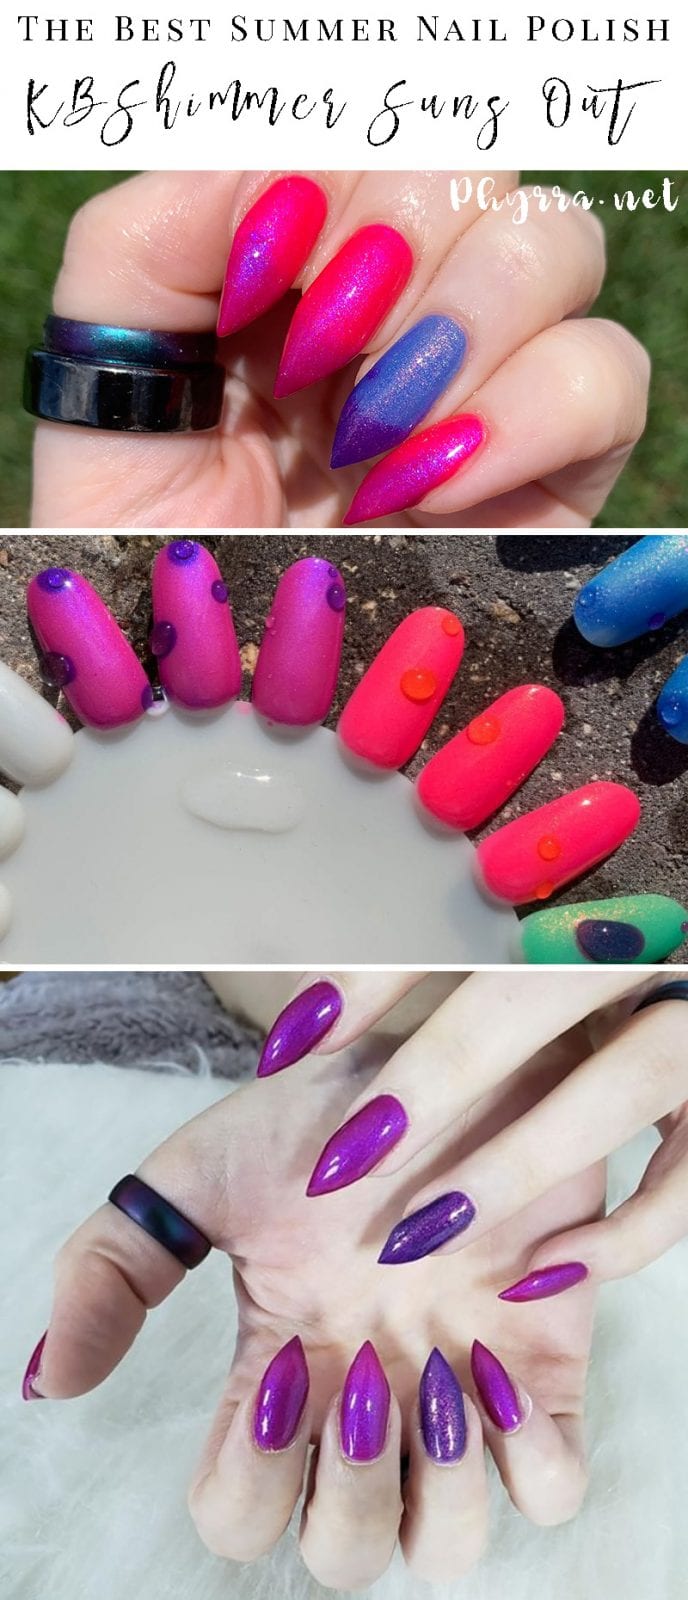 The Best Nail Polish for Summer